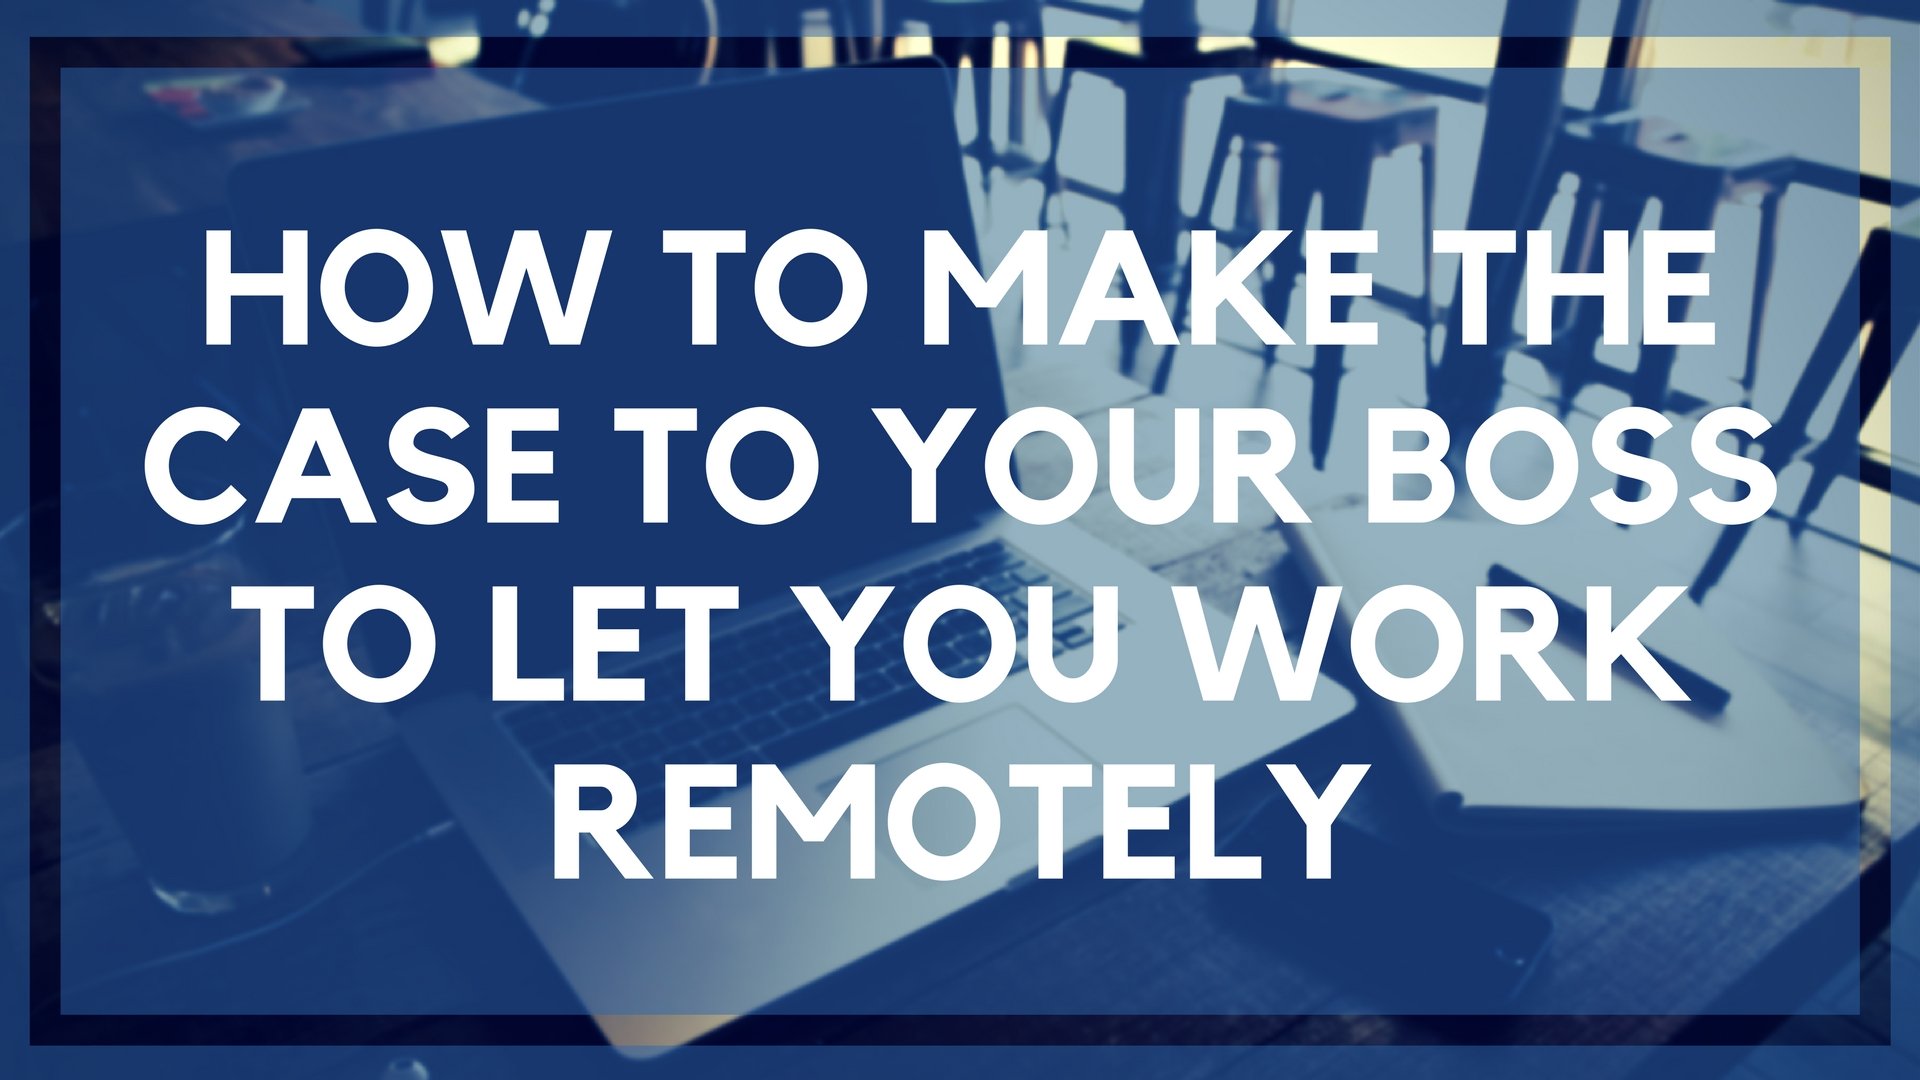 How to Make the Case to Your Boss to Let You Work Remotely